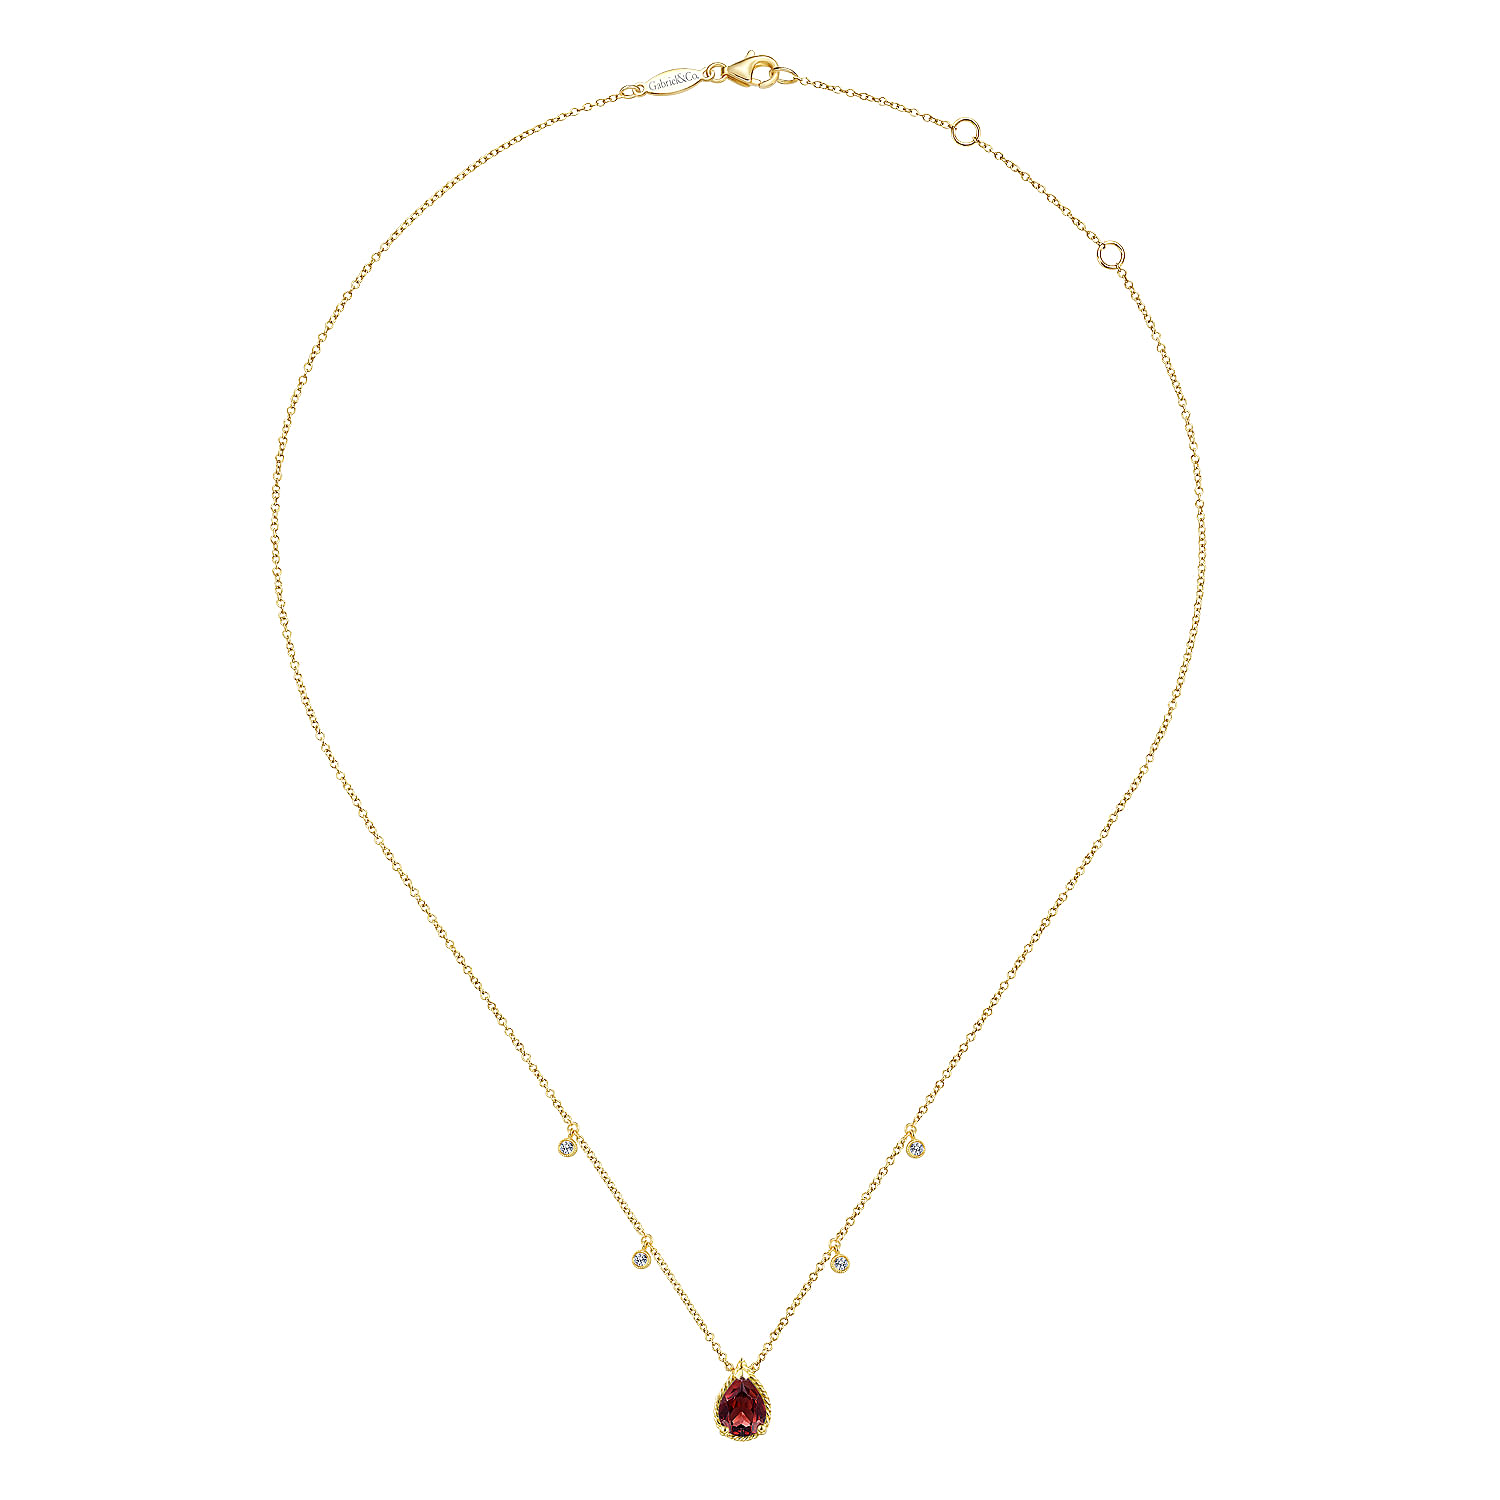 14K Yellow Gold Pear Shape Garnet Pendant Necklace with Diamond Side Drops